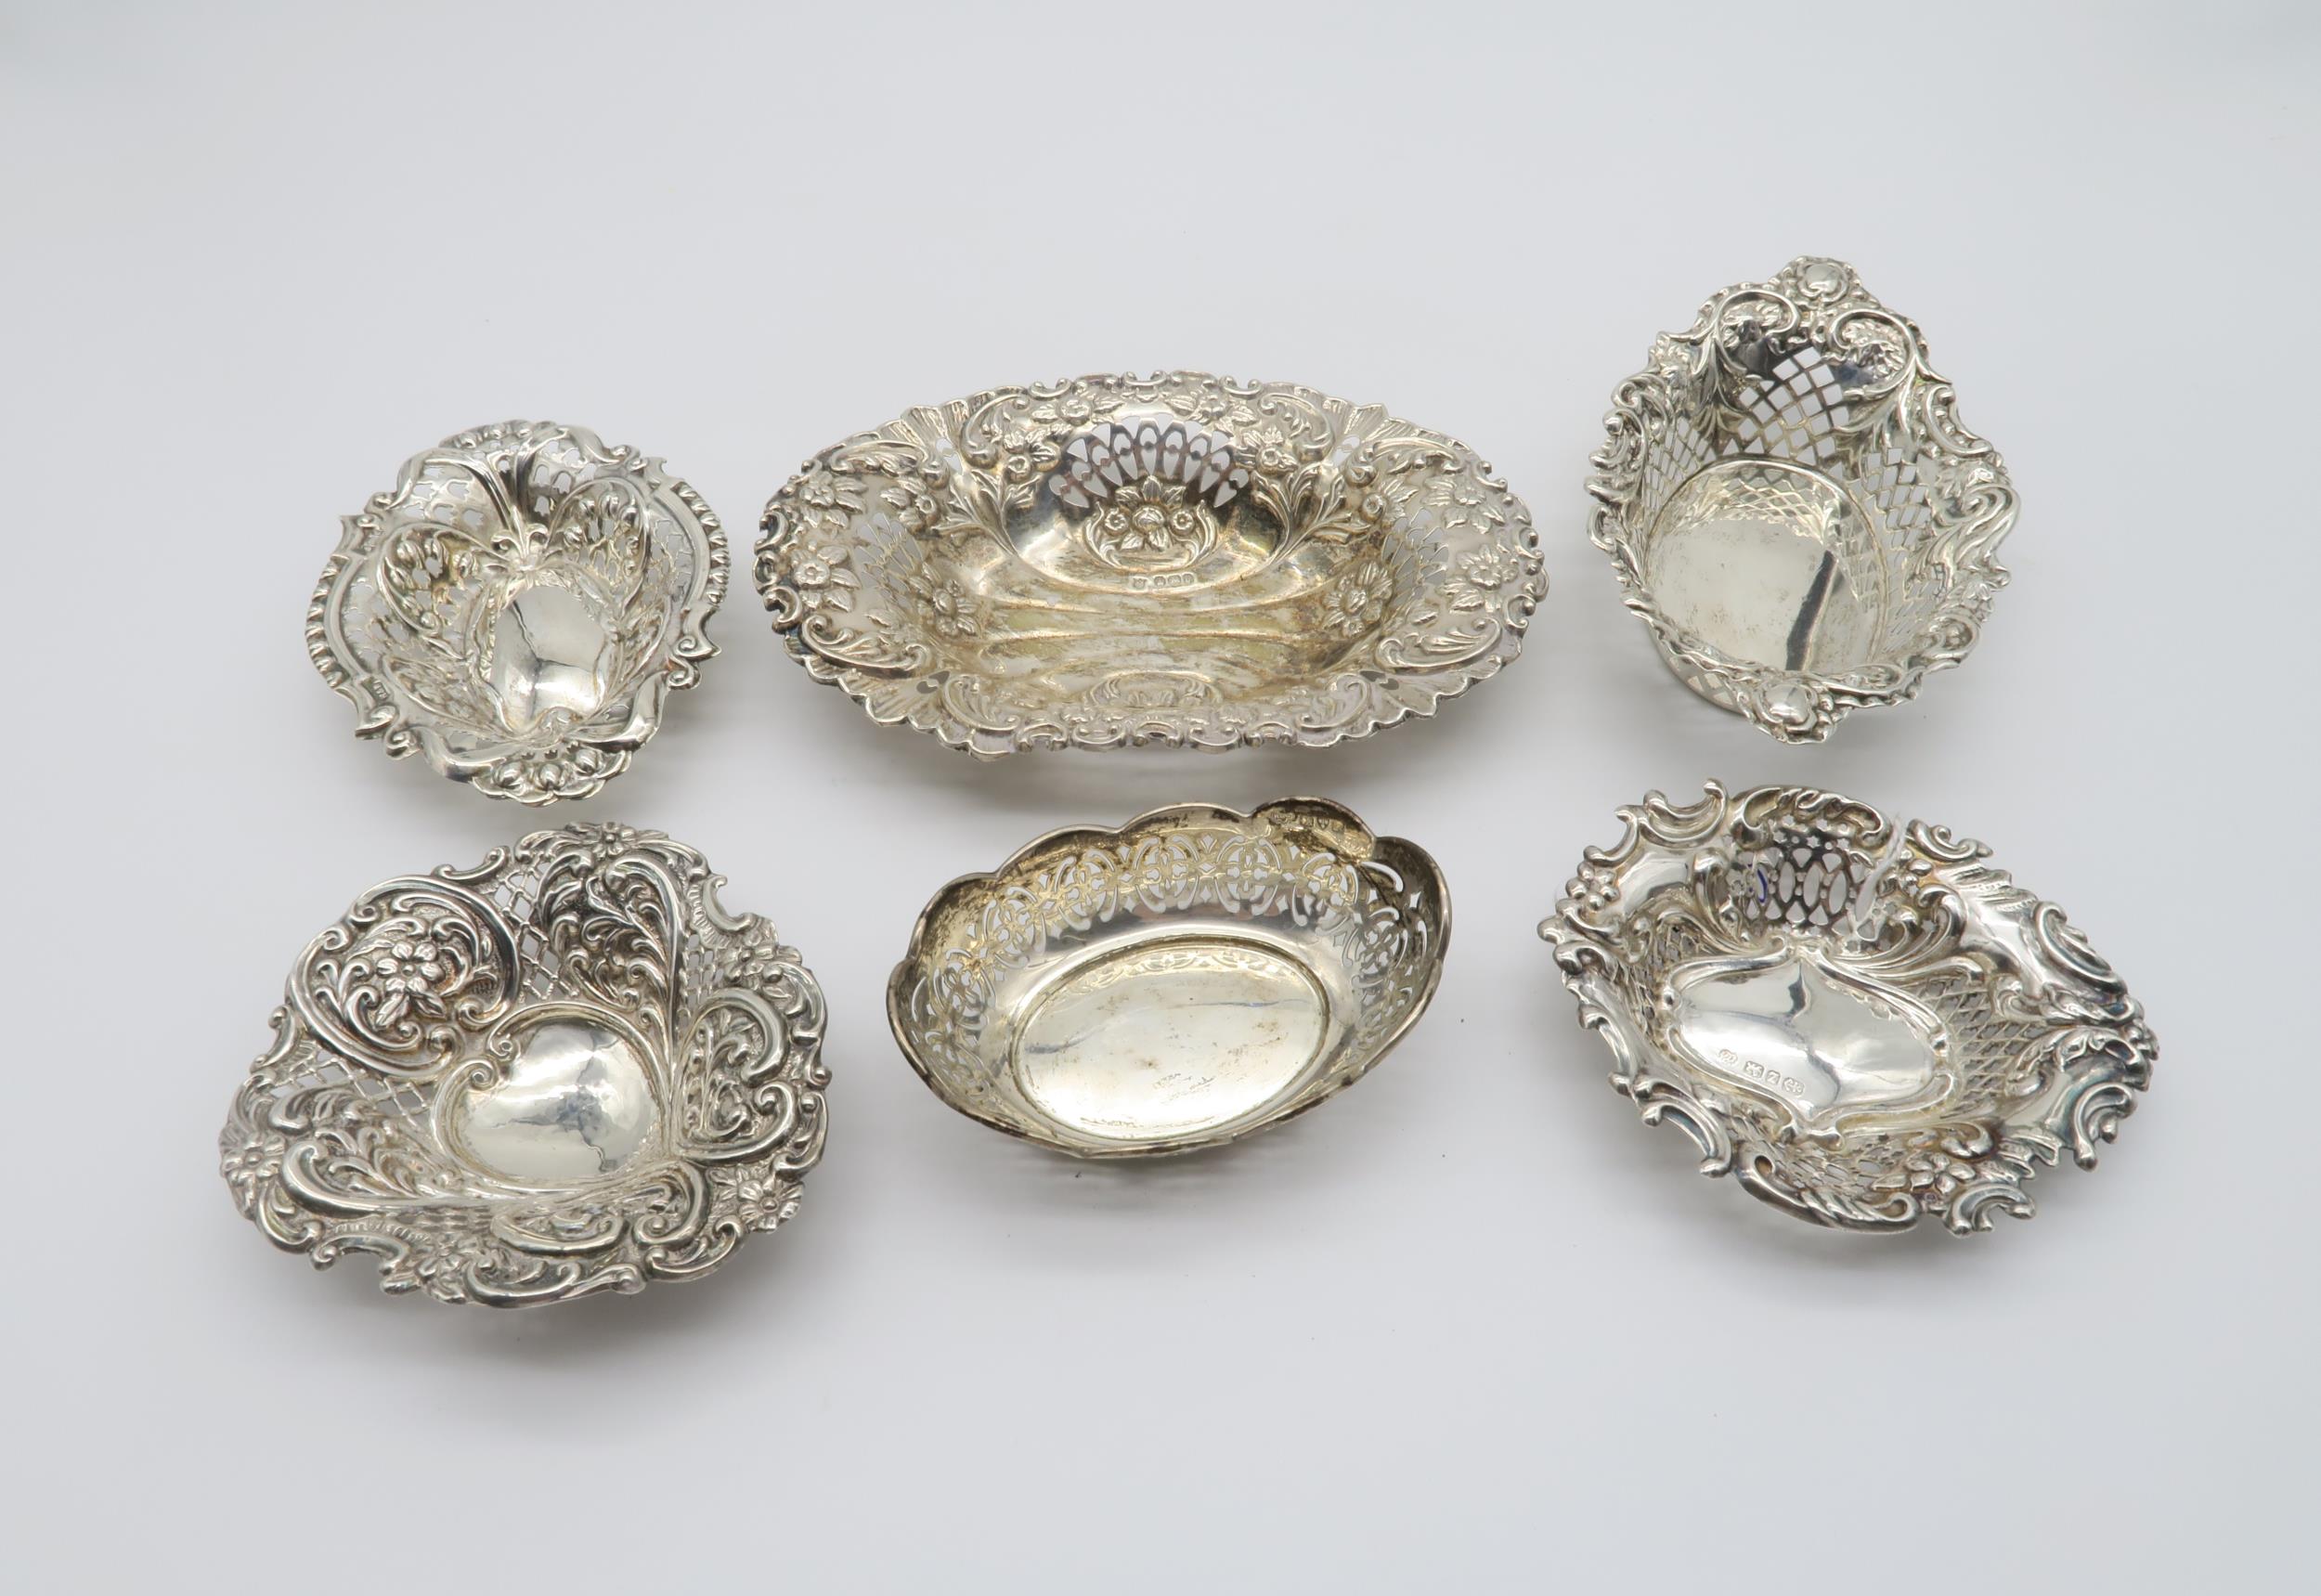 A collection of various silver bon bon dishes / trinket dishes, all with pierced decoration, various